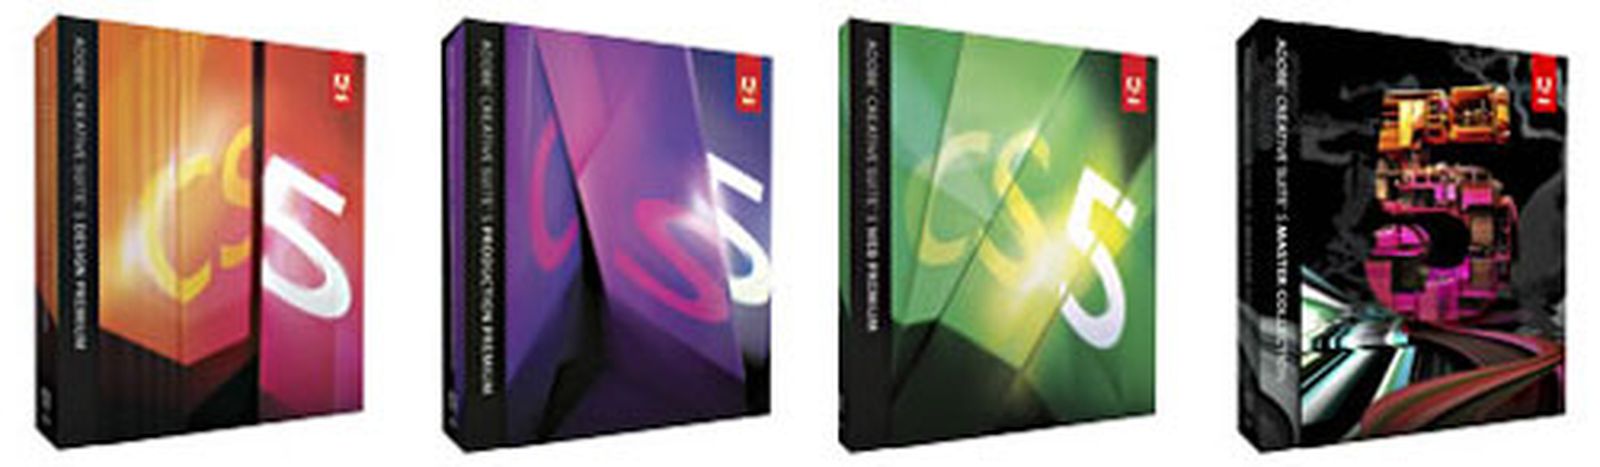 how much is adobe creative suite for mac